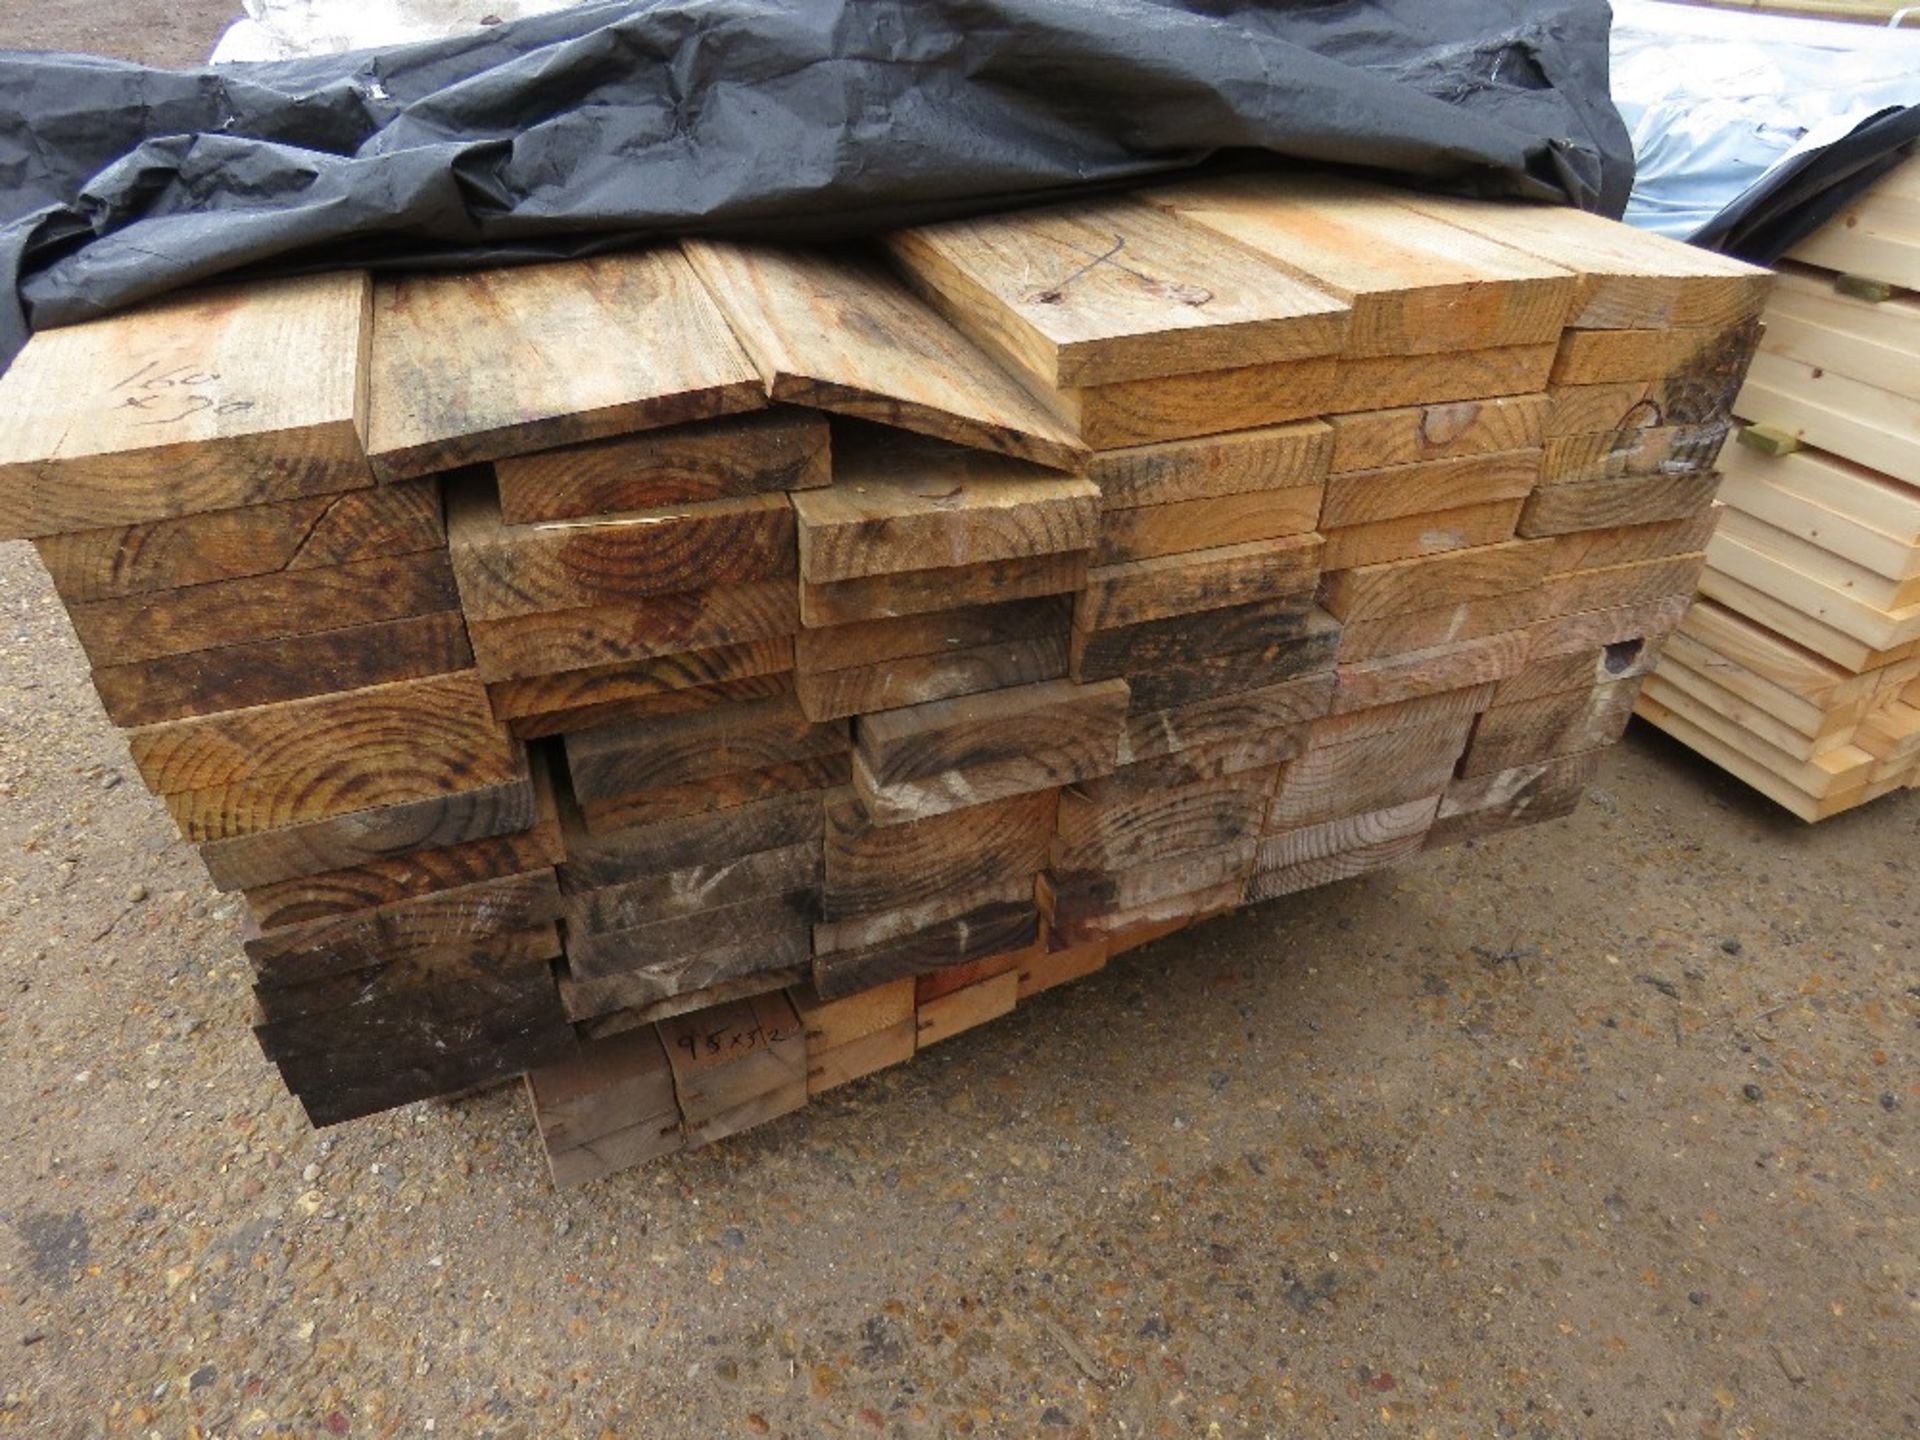 2 x BUNDLES OF UNTREATED BOARDS/TIMBERS, 160MM X 30MM AND 95MM X 52MM APPROX. - Image 2 of 4